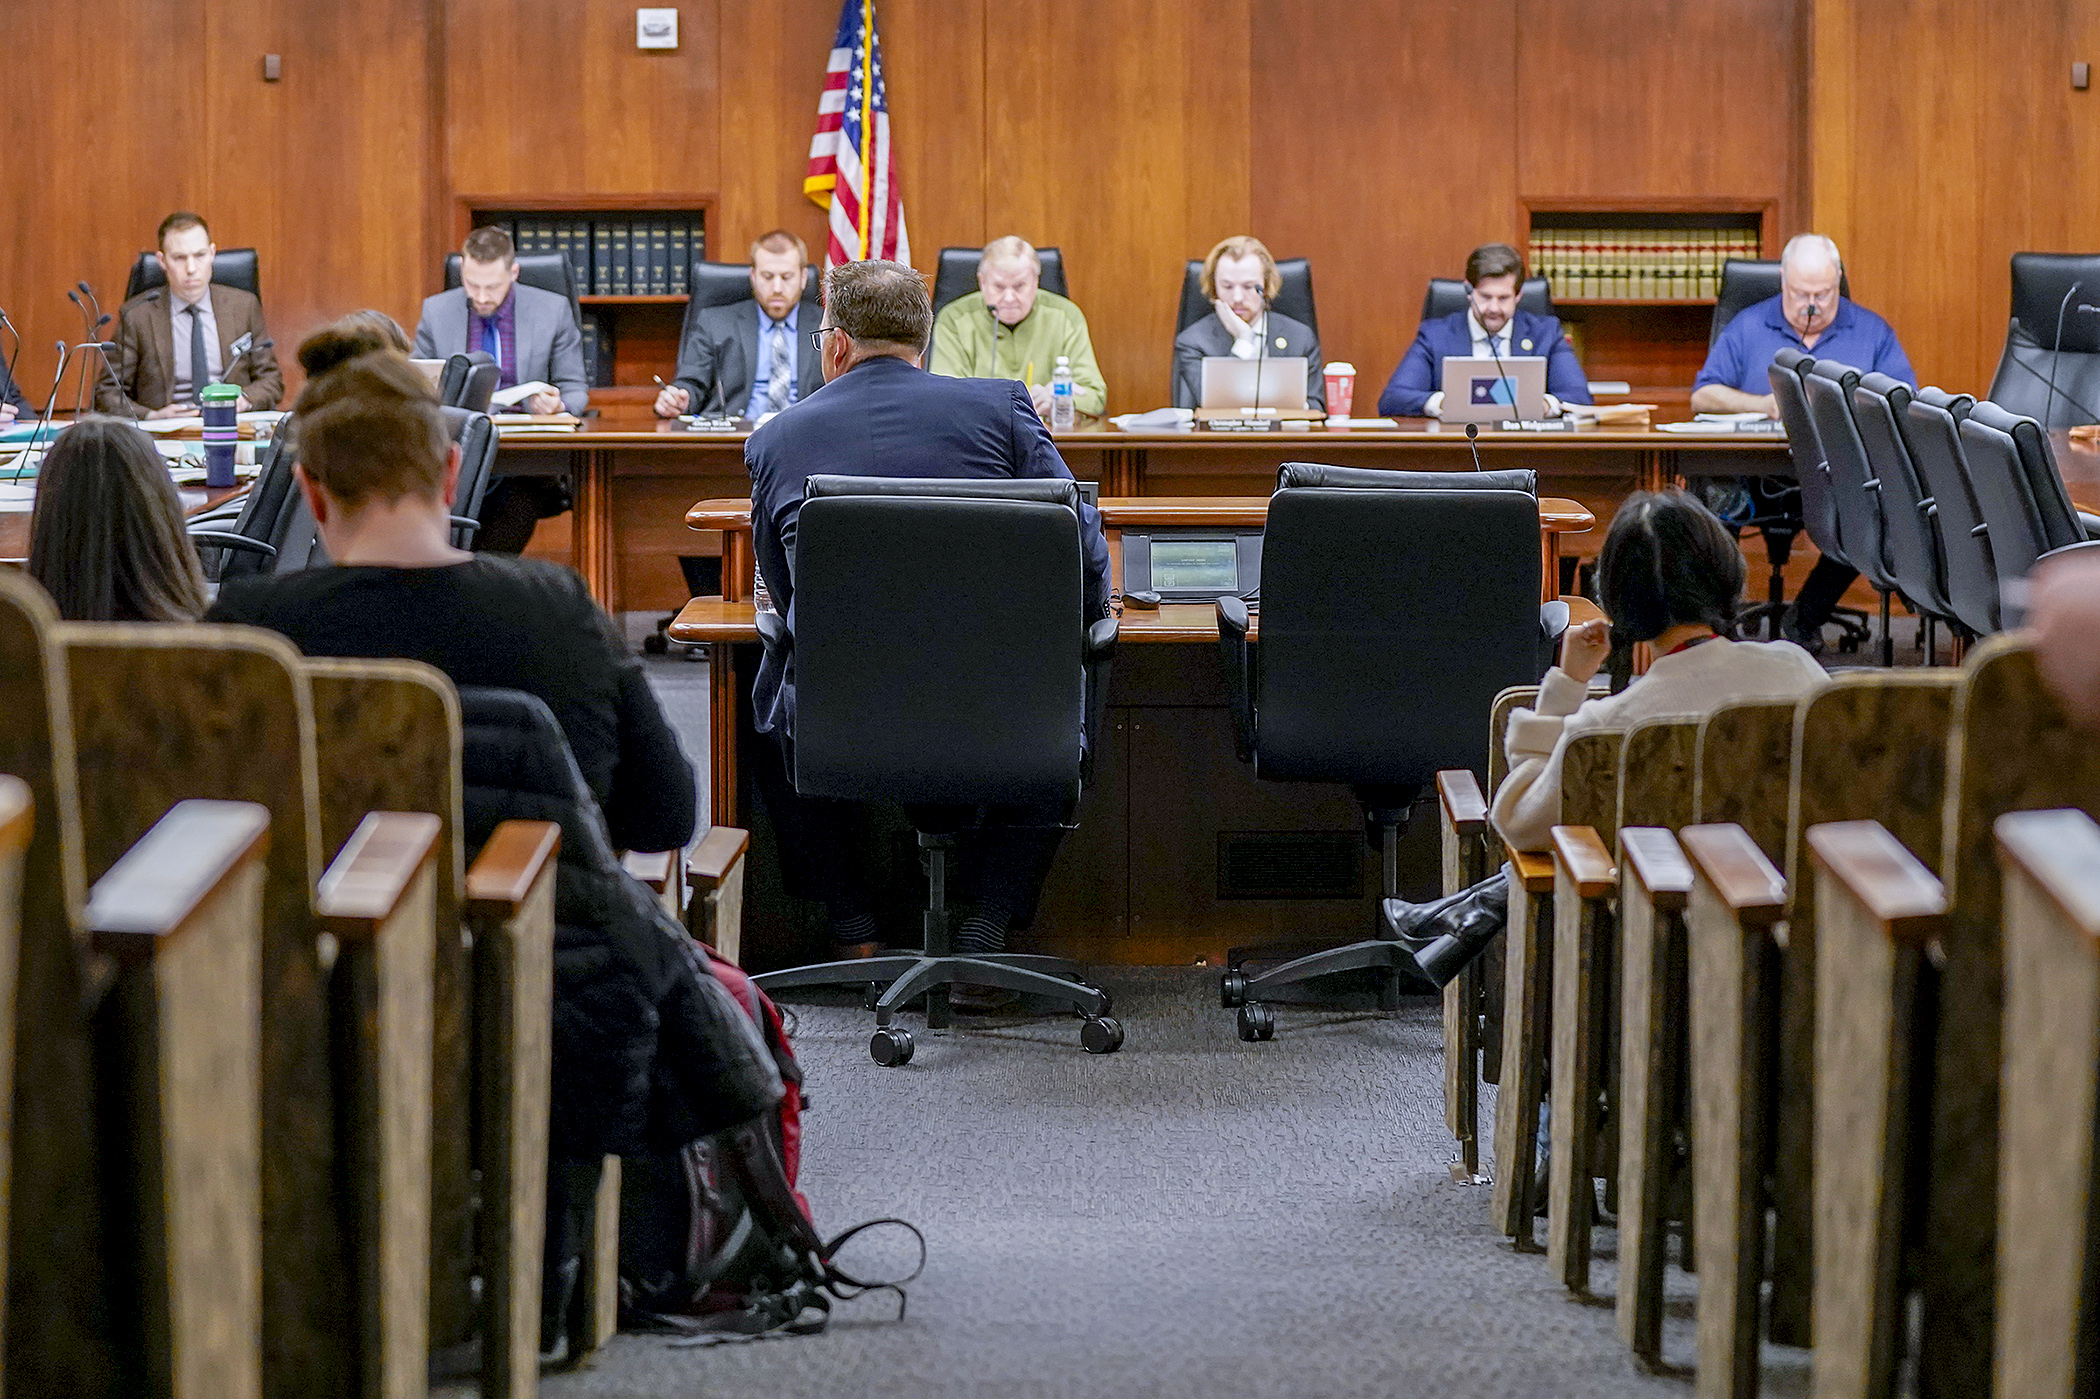 Office of Higher Education Commissioner Dennis Olson testifies March 21 before the House Higher Education Finance and Policy Committee regarding the higher education policy bill that received committee approval. (Photo by Michele Jokinen) 